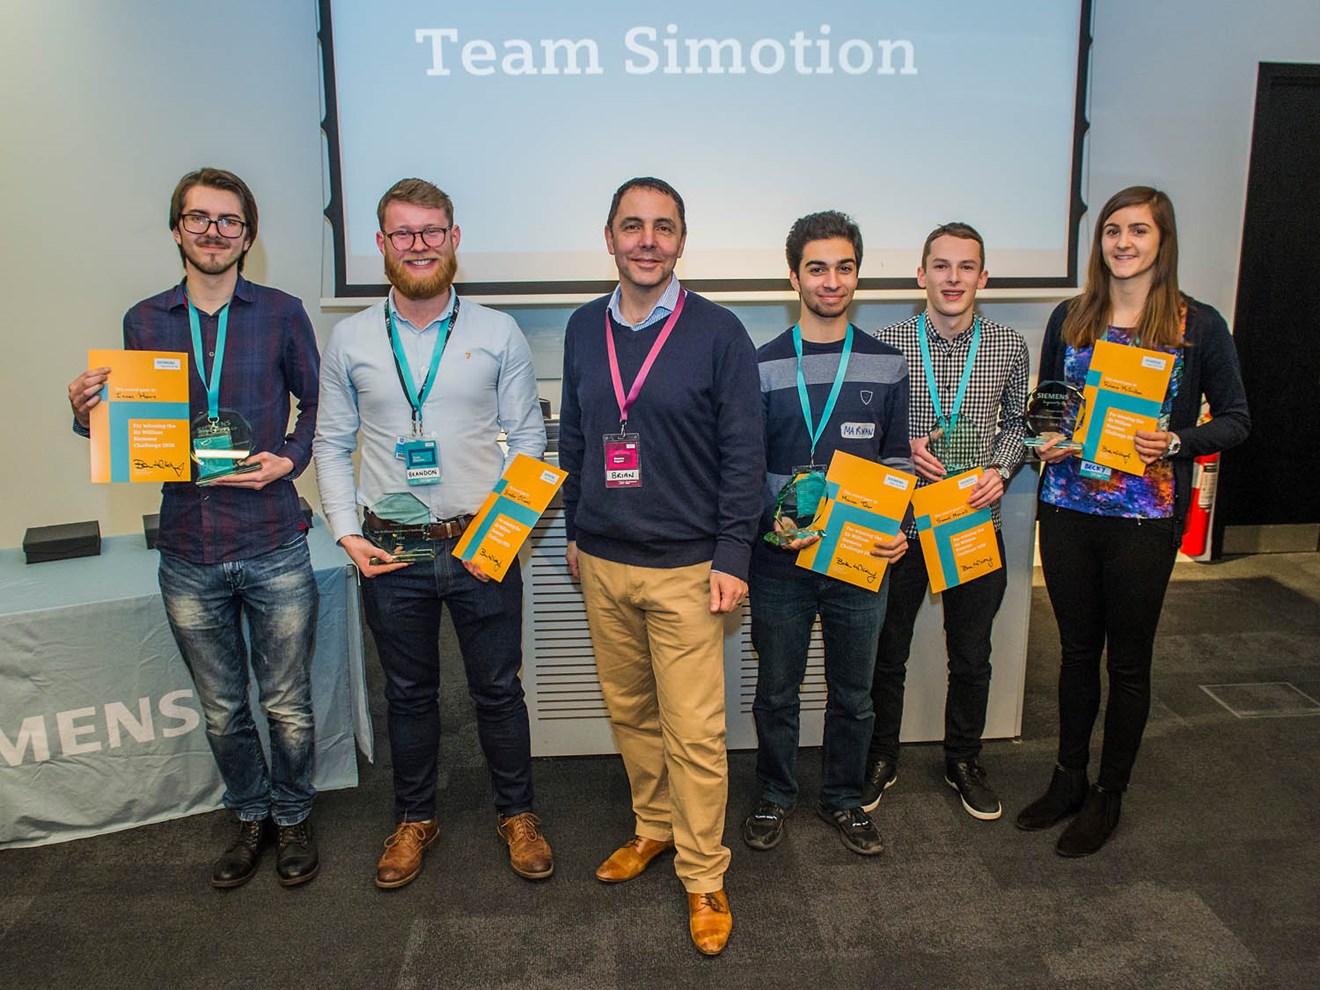 Top engineering students come together for innovative Siemens challenge: siemens-sheffield-gb-photos-323-full.jpg